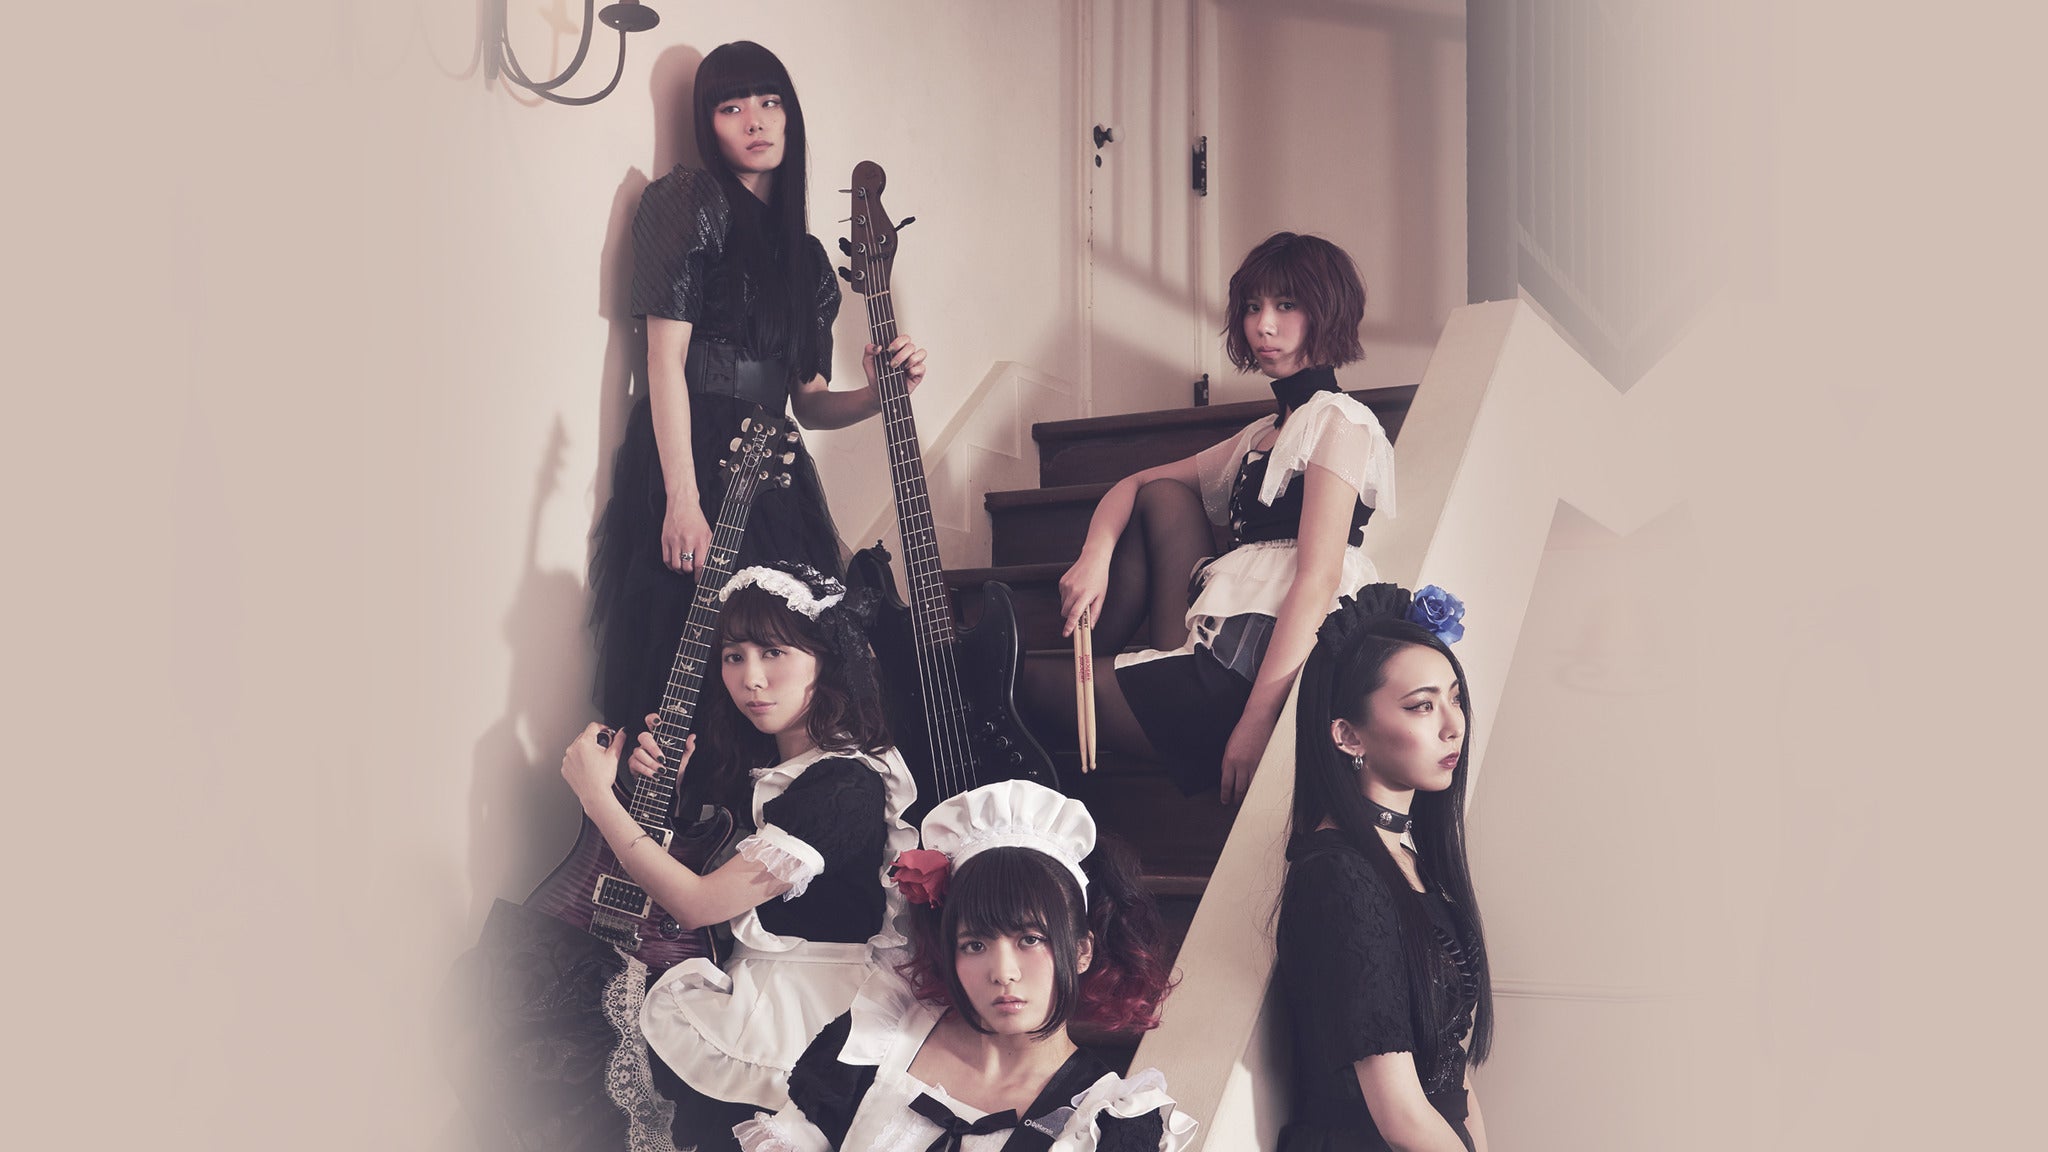 BAND-MAID WORLD DOMINATION TOUR 2019 ~gekidou~ in New York promo photo for Music Geeks presale offer code